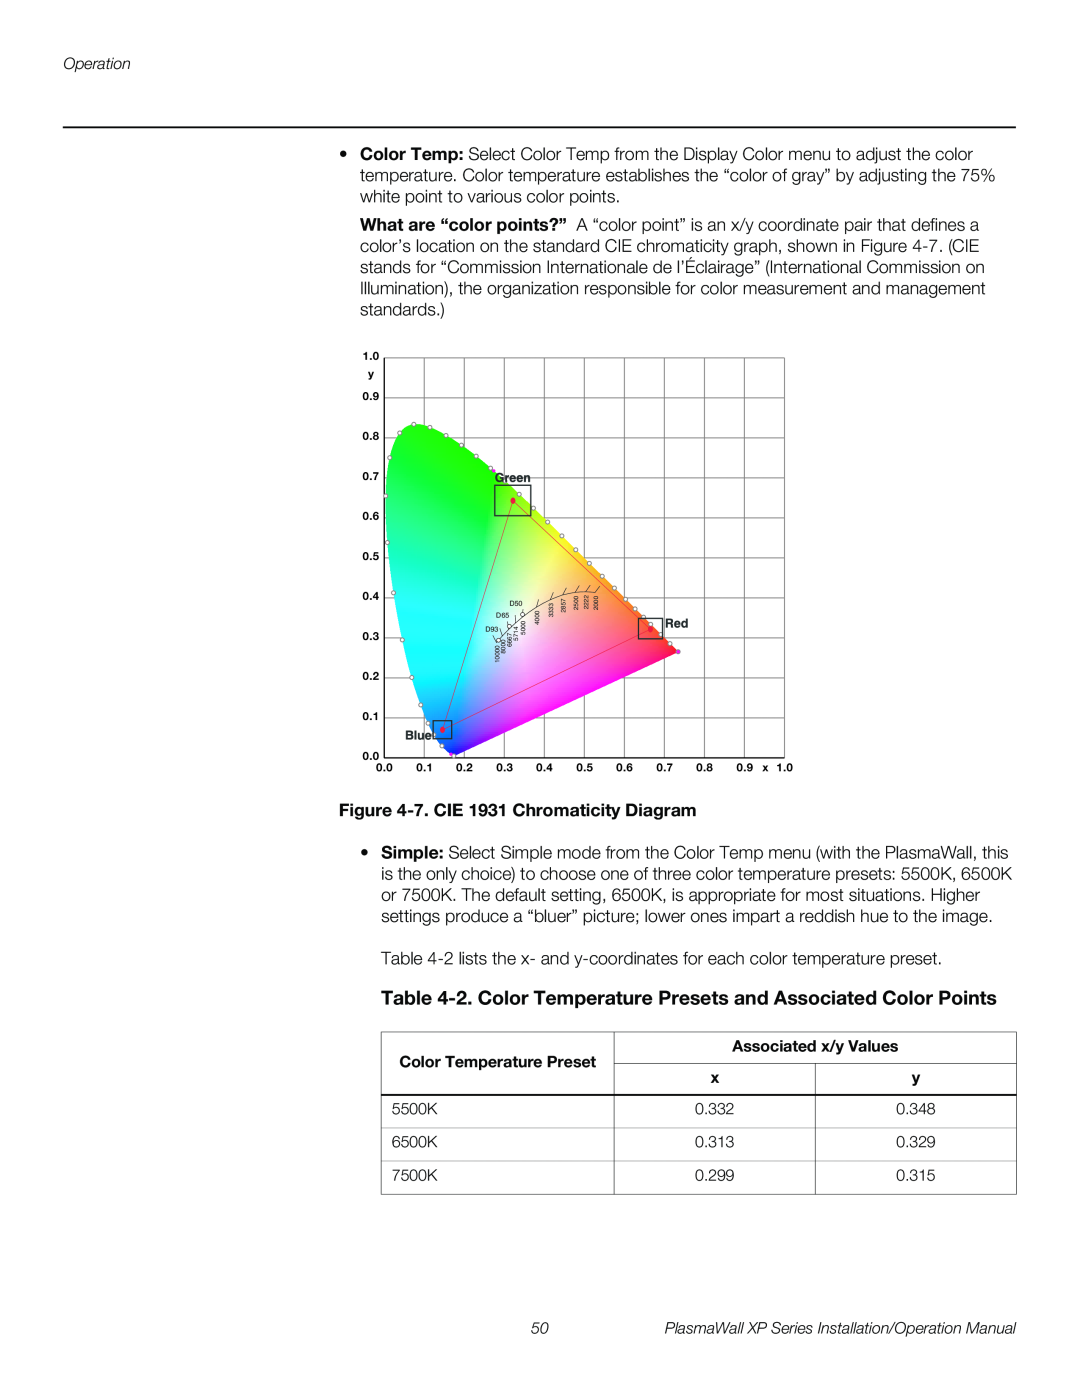 Runco XP-OPAL65DHD, XP-50DHD 2. Color Temperature Presets and Associated Color Points, 7. CIE 1931 Chromaticity Diagram 